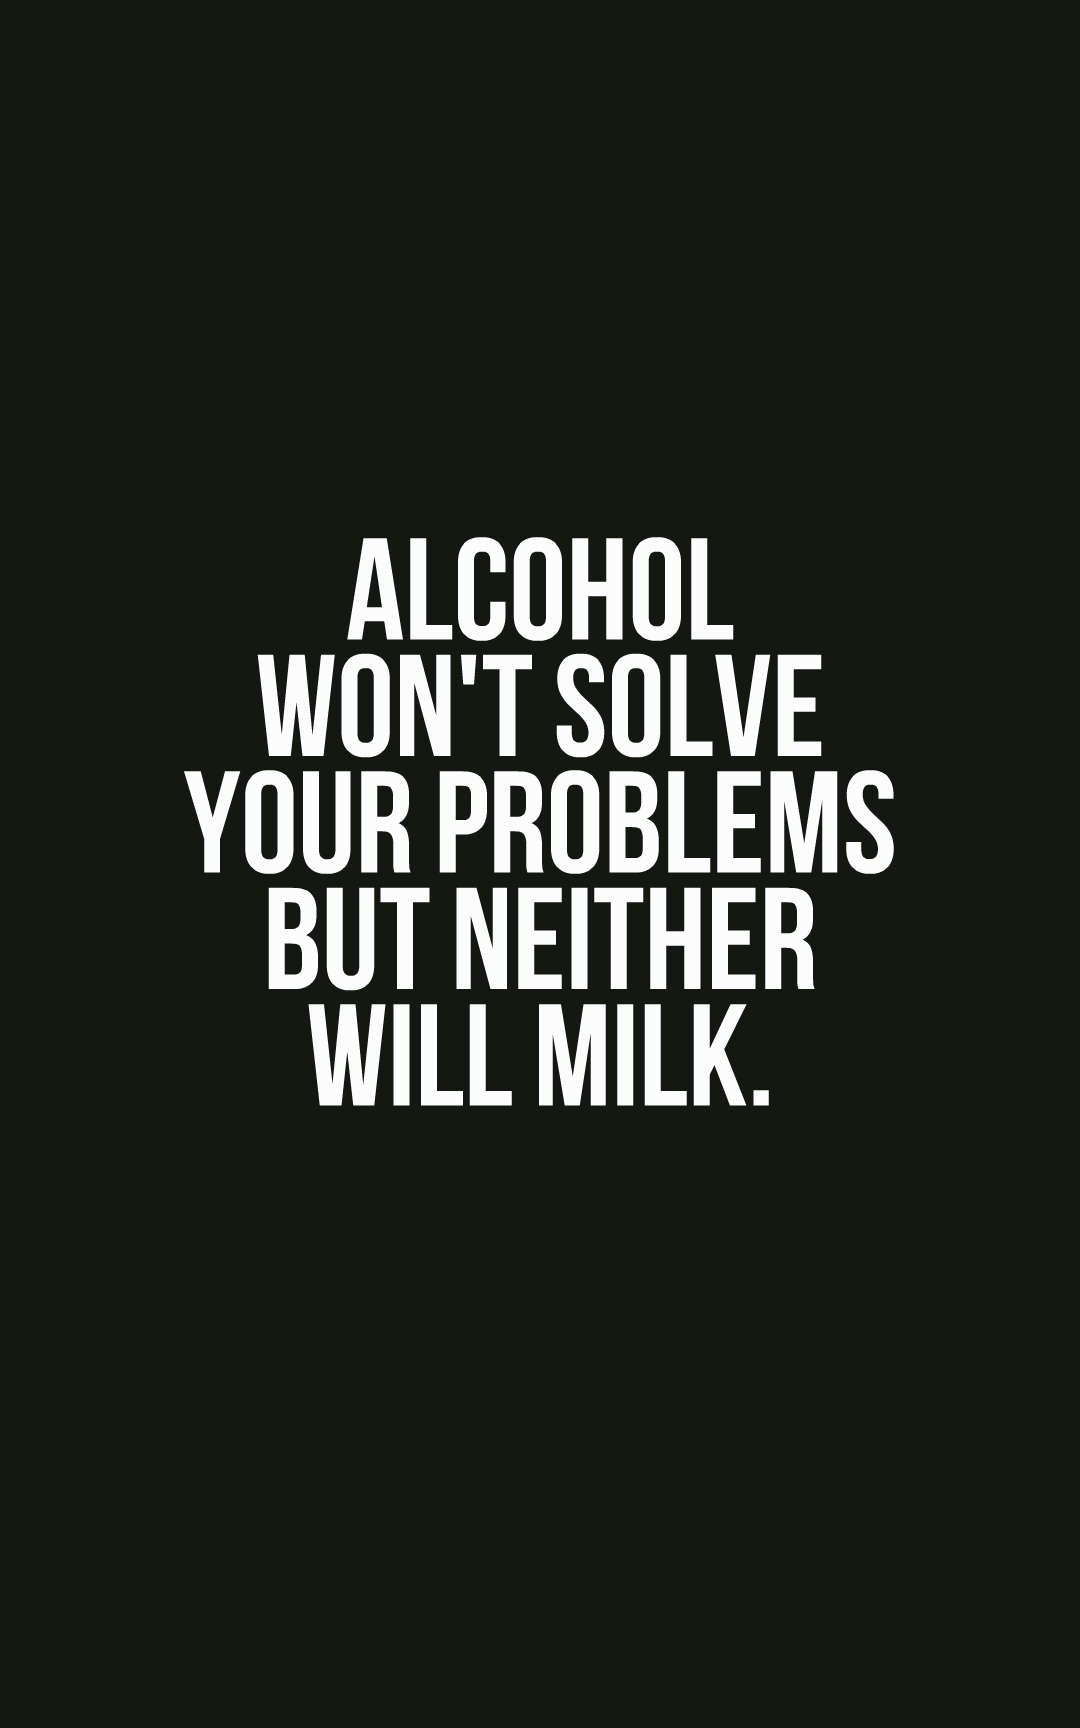 50 Inspirational Alcohol Quotes And Sayings 